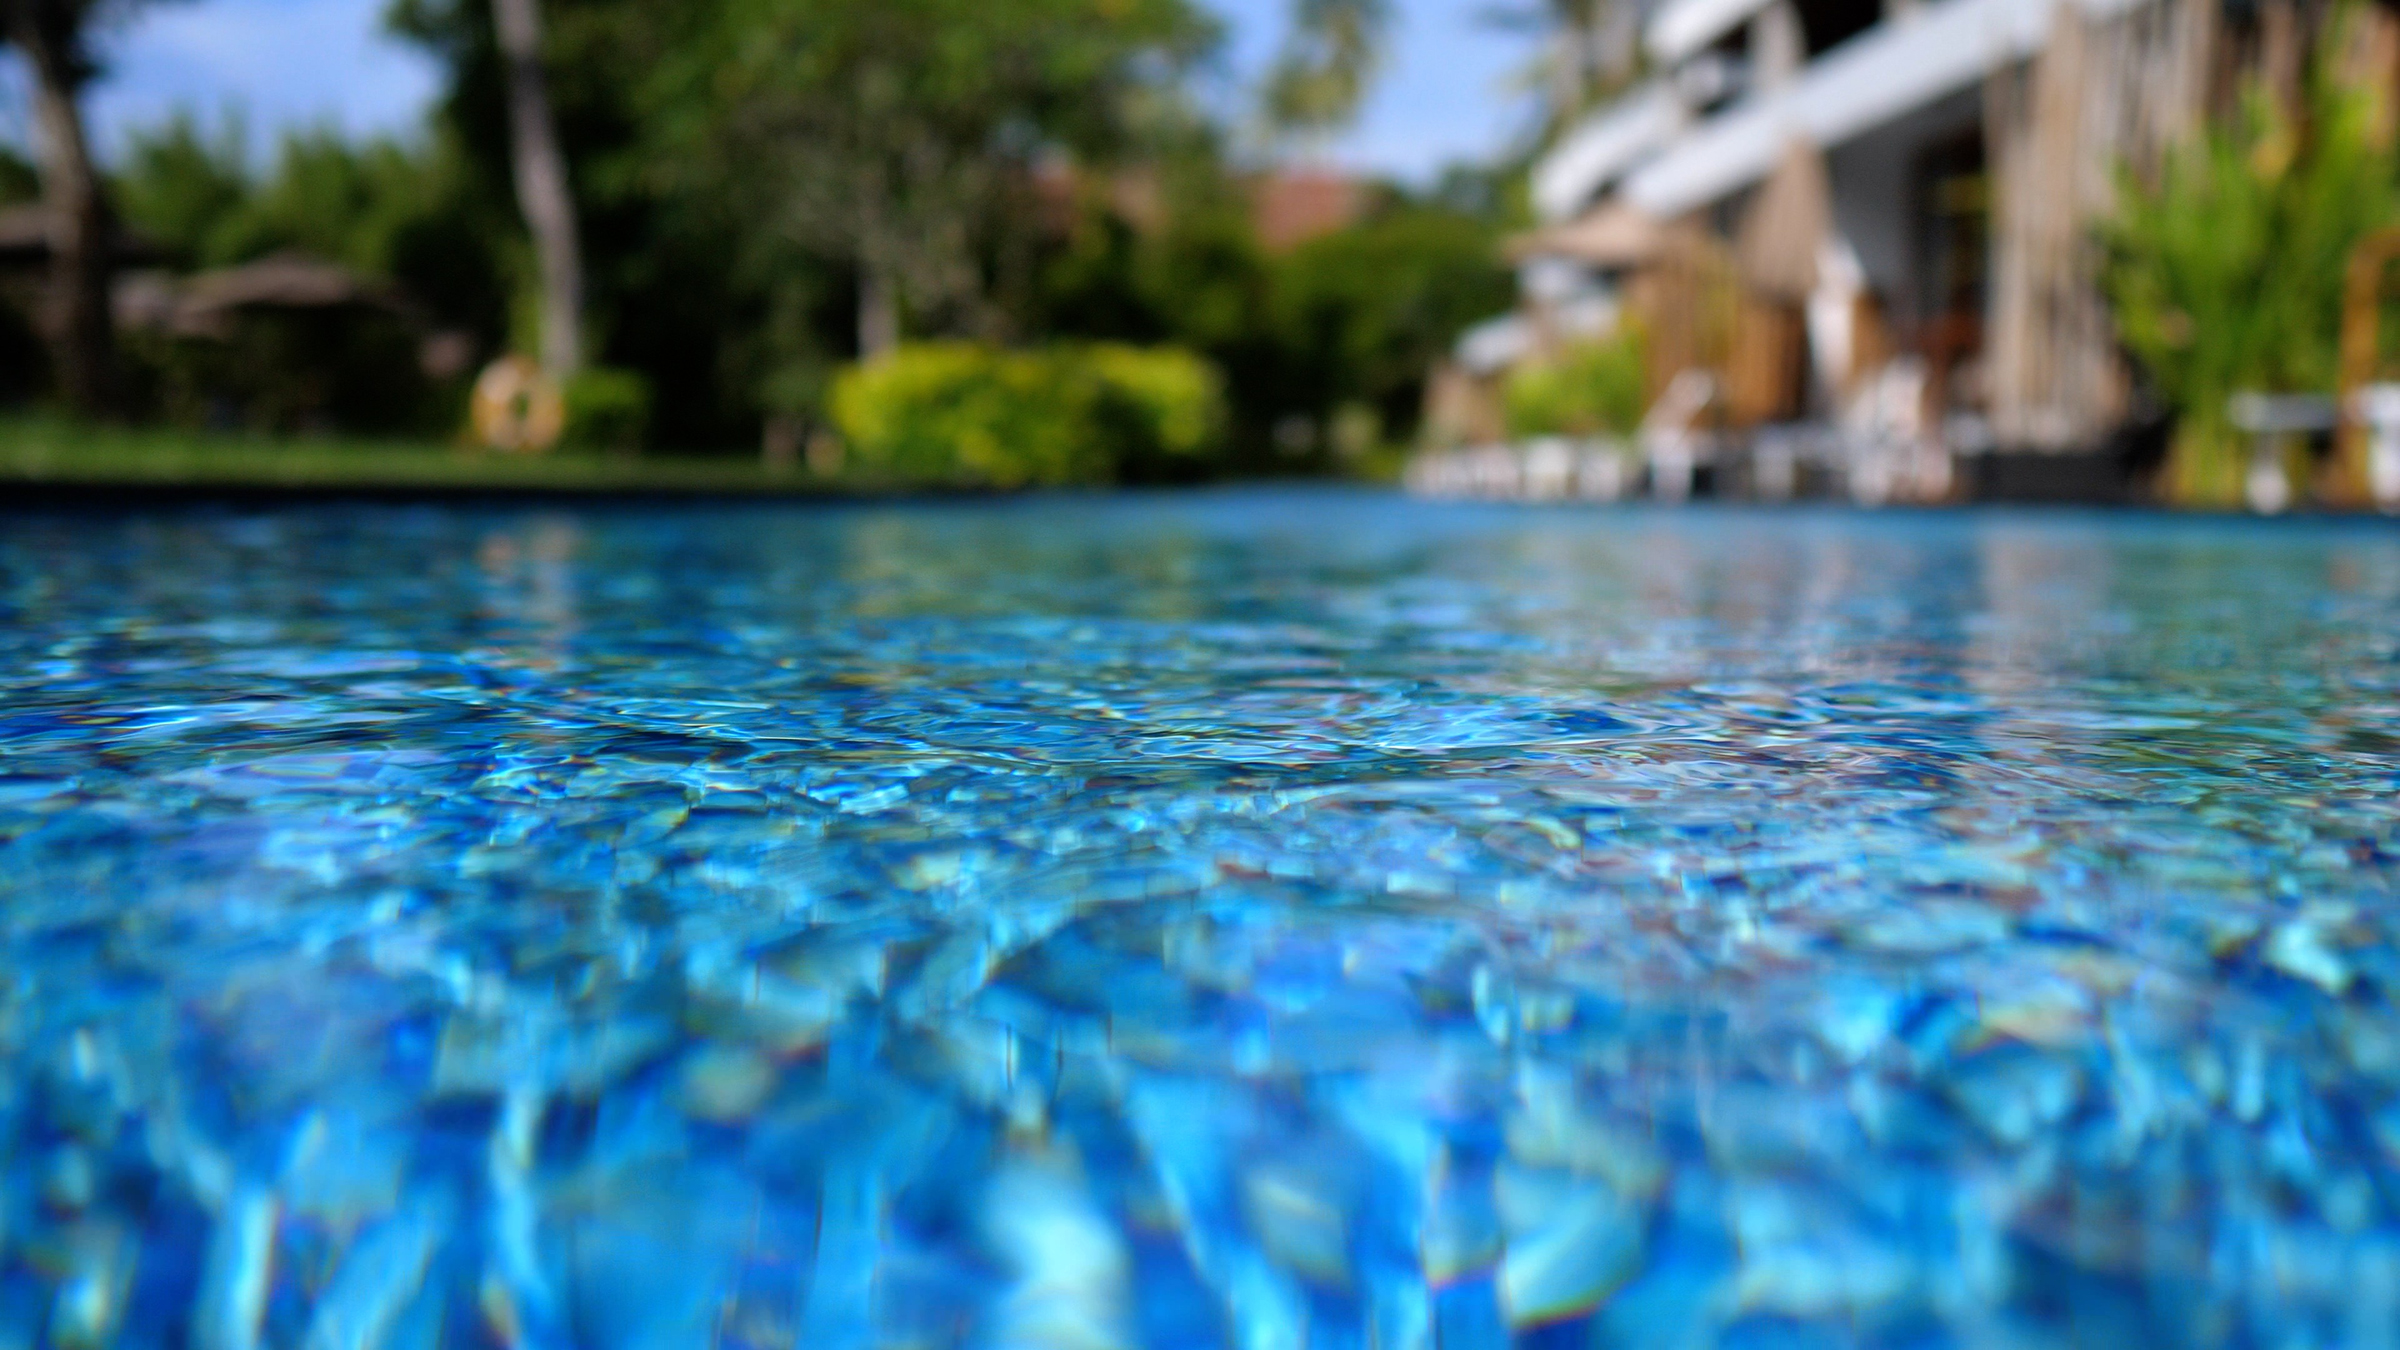 Tips for Closing and Winterizing Your Pool